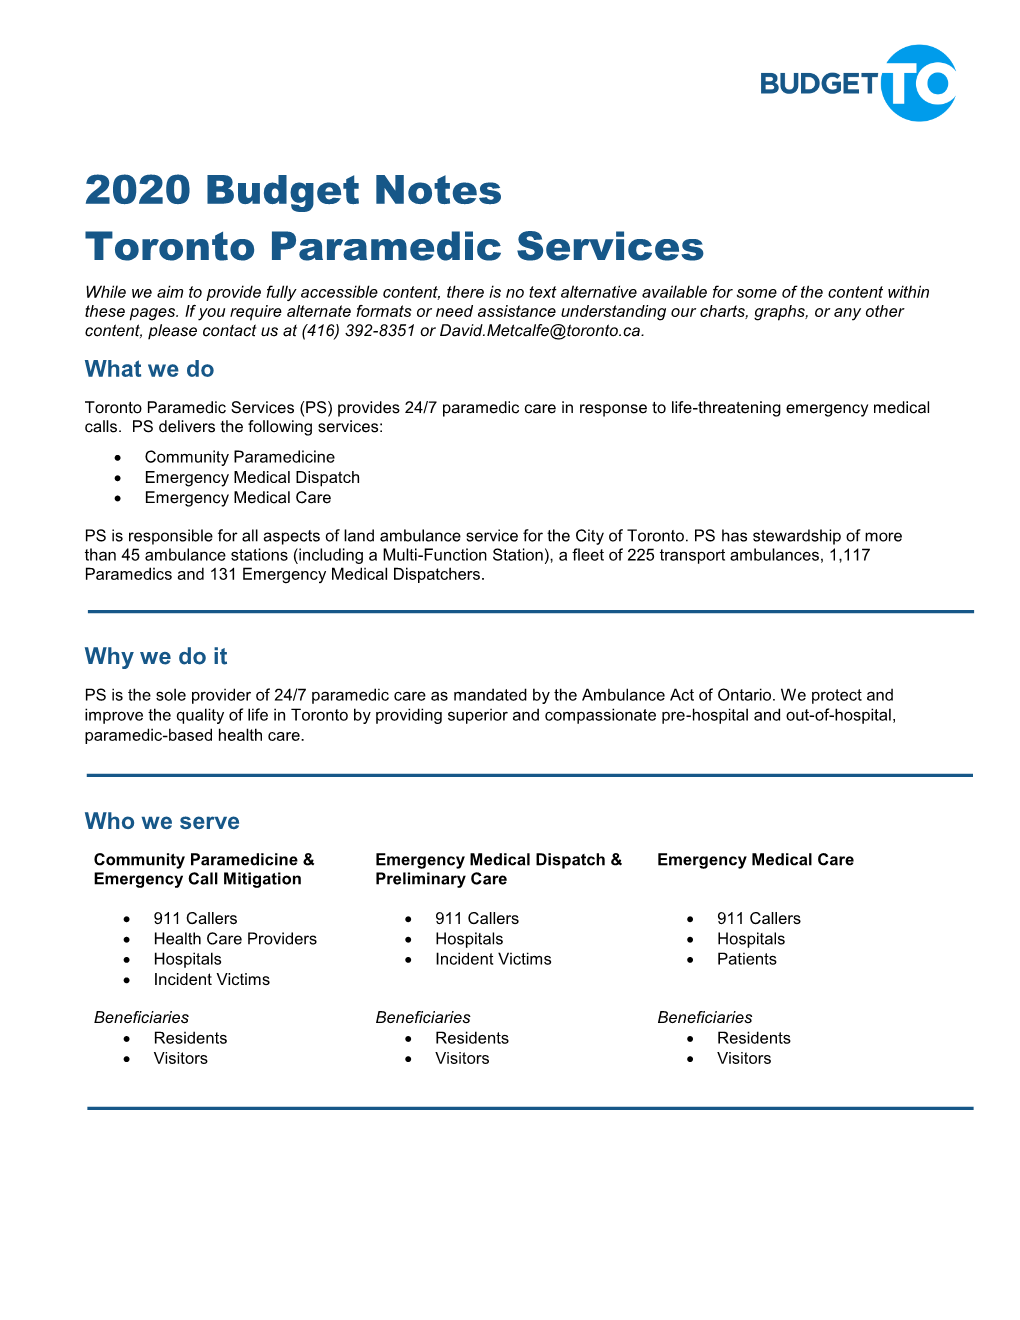 2020 Staff Recommended Capital and Operating Budget Notes – Toronto Paramedics Services